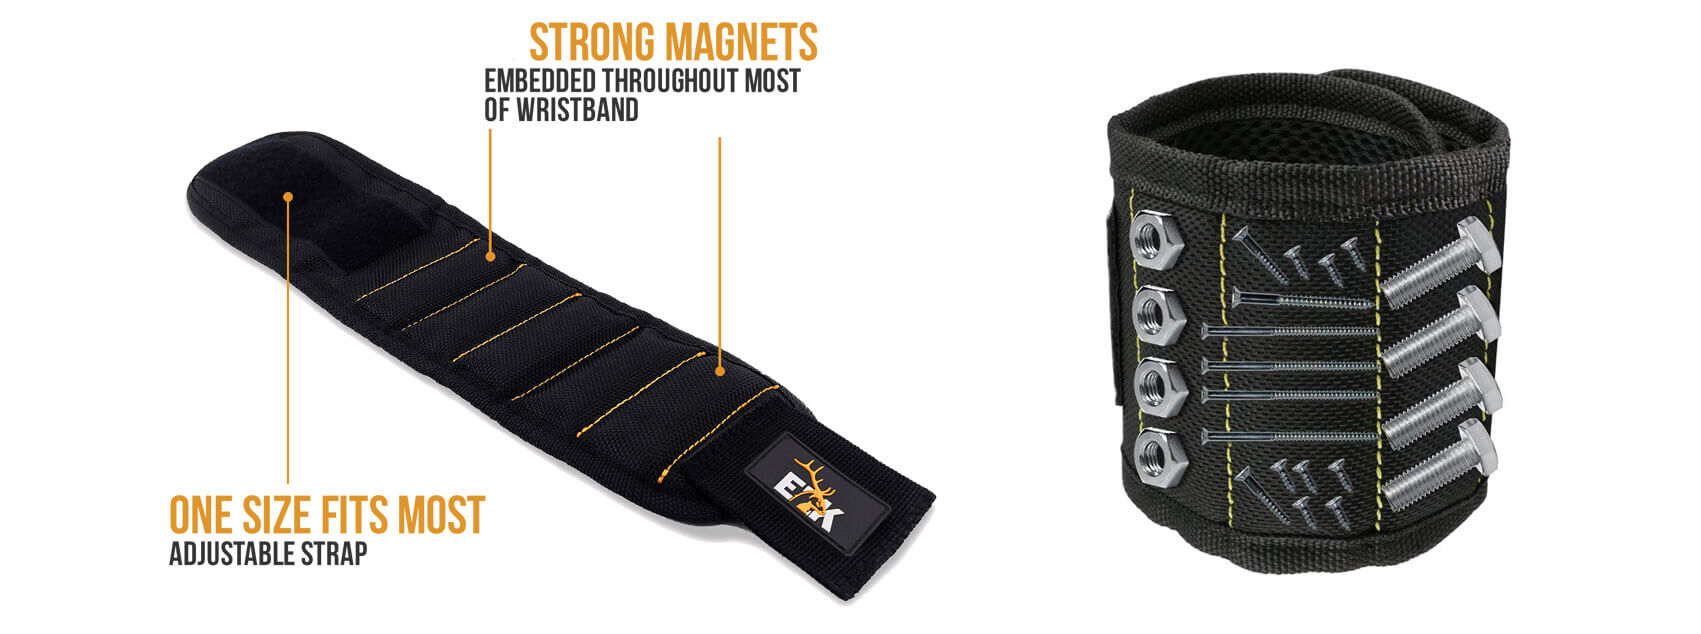 Magnetic-Wristband